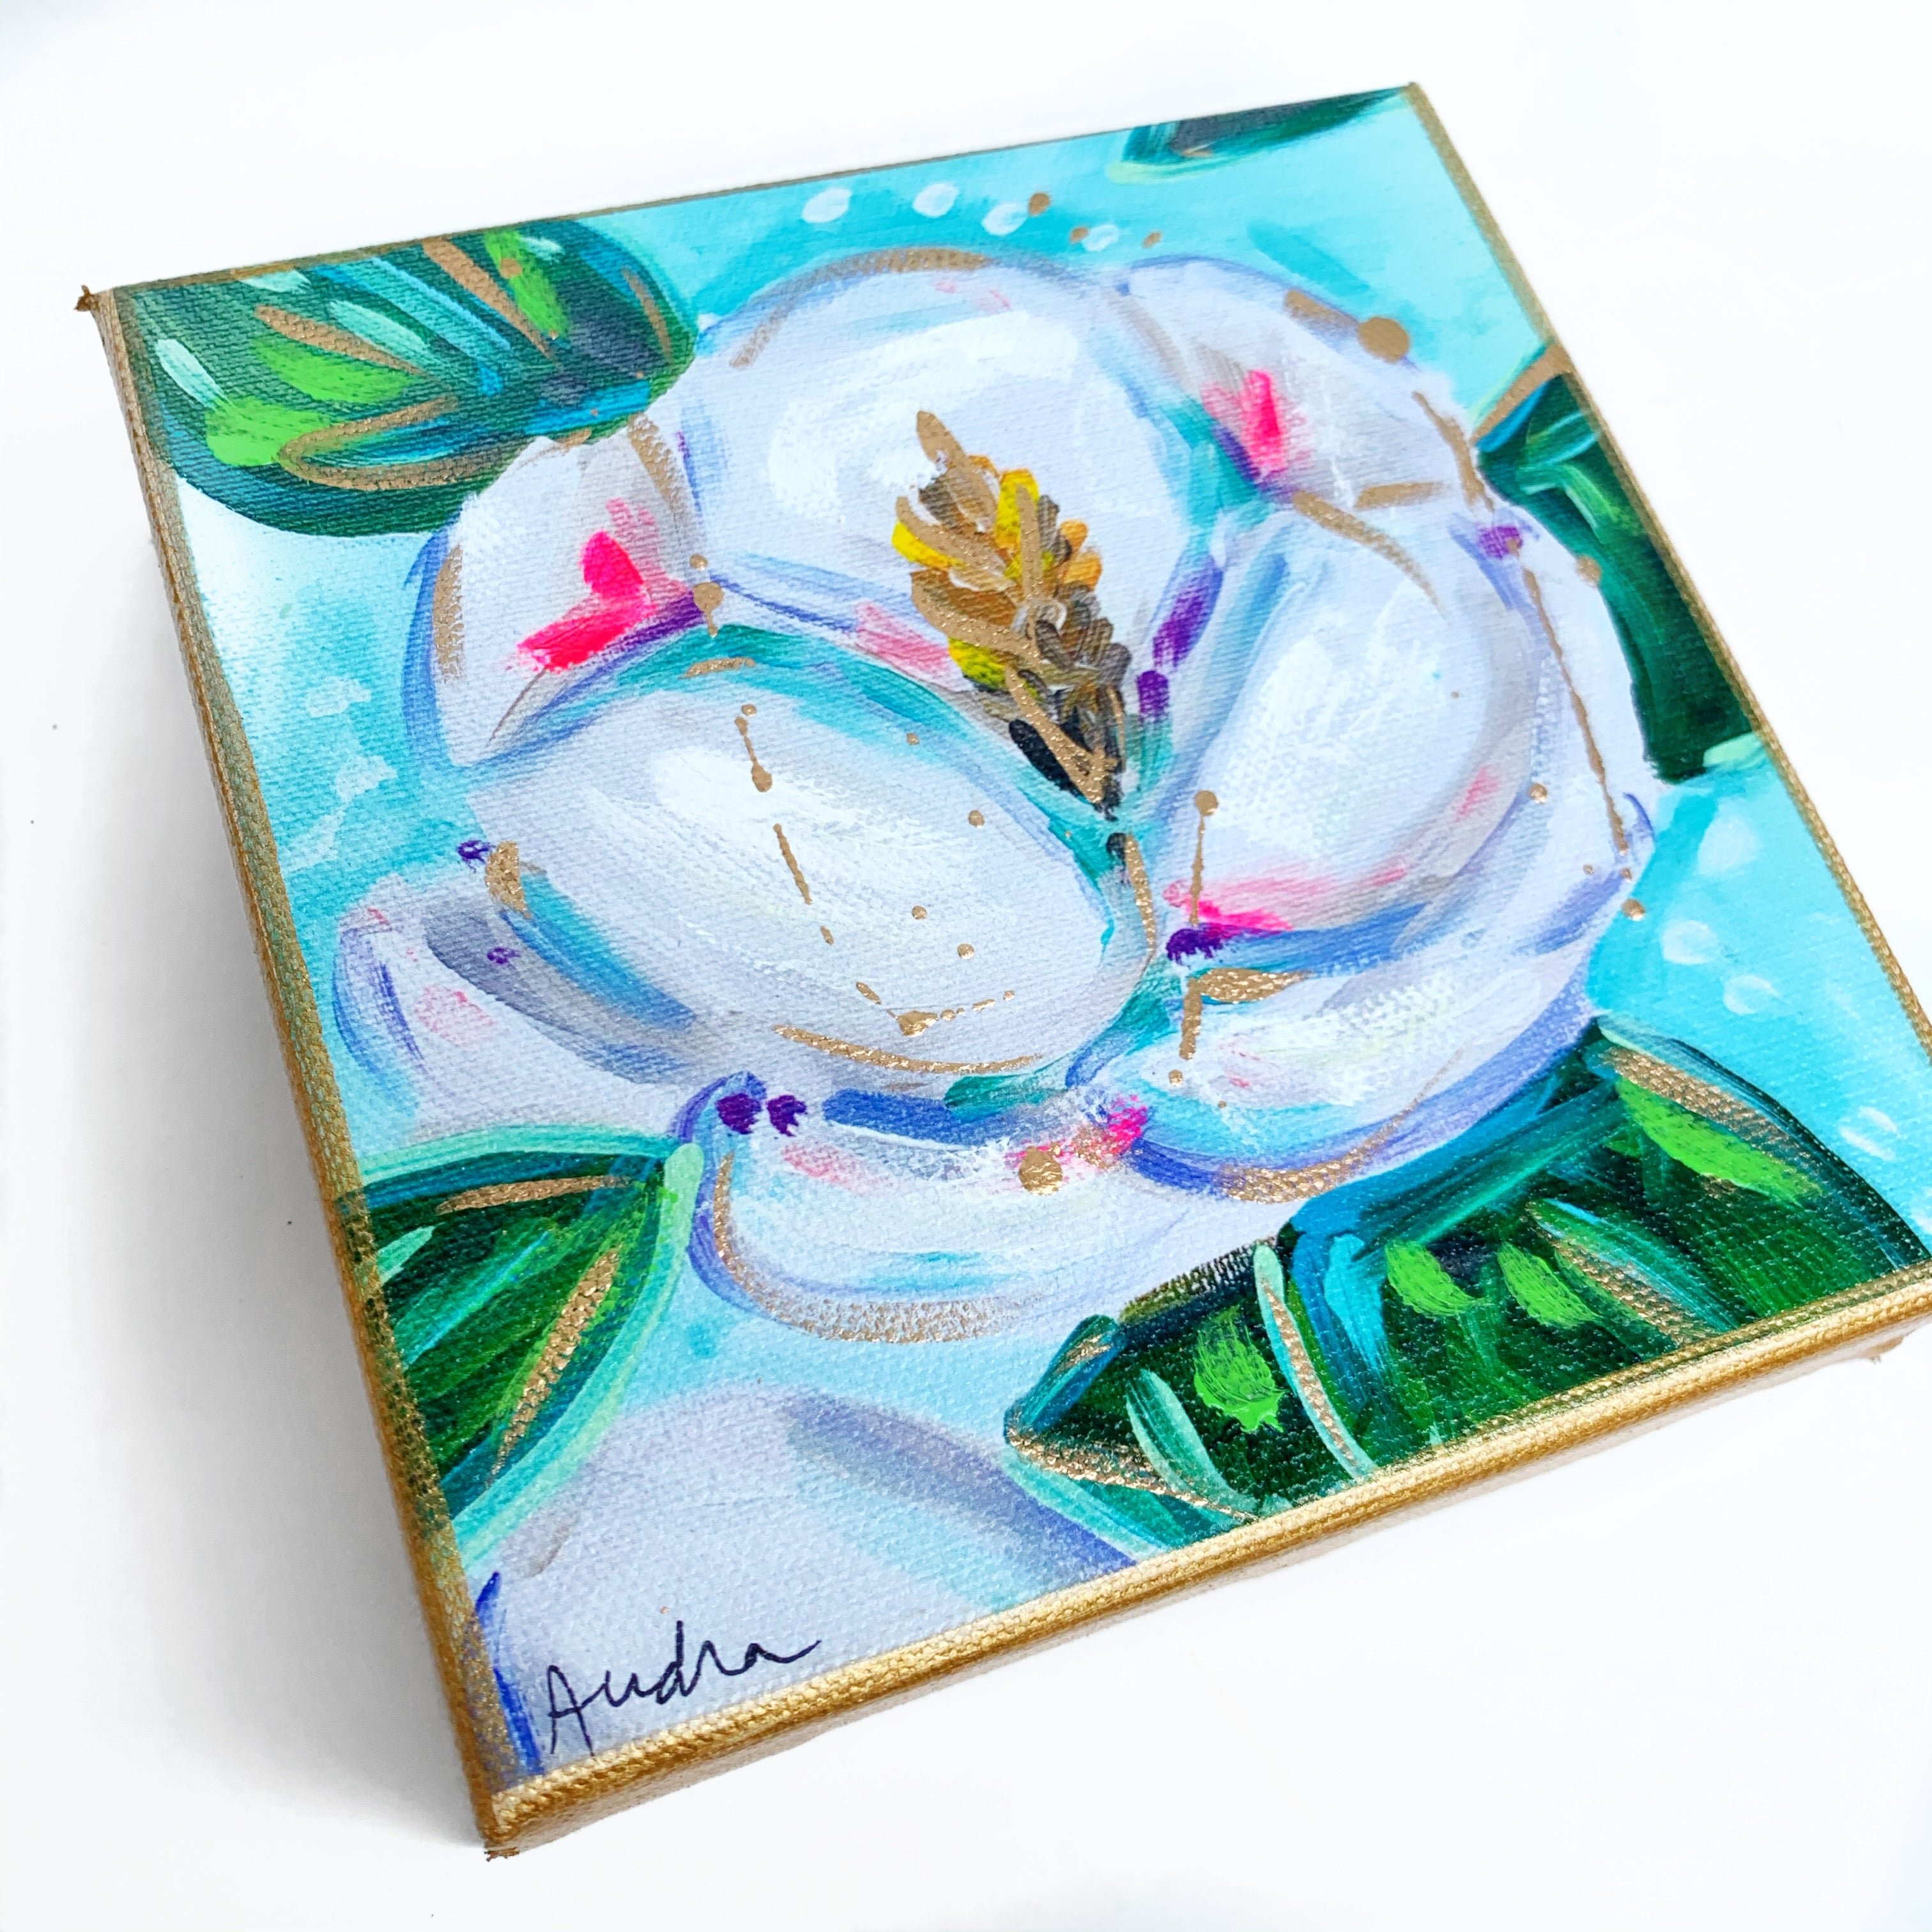 Magnolia on 6"x6" Gallery Wrapped Canvas